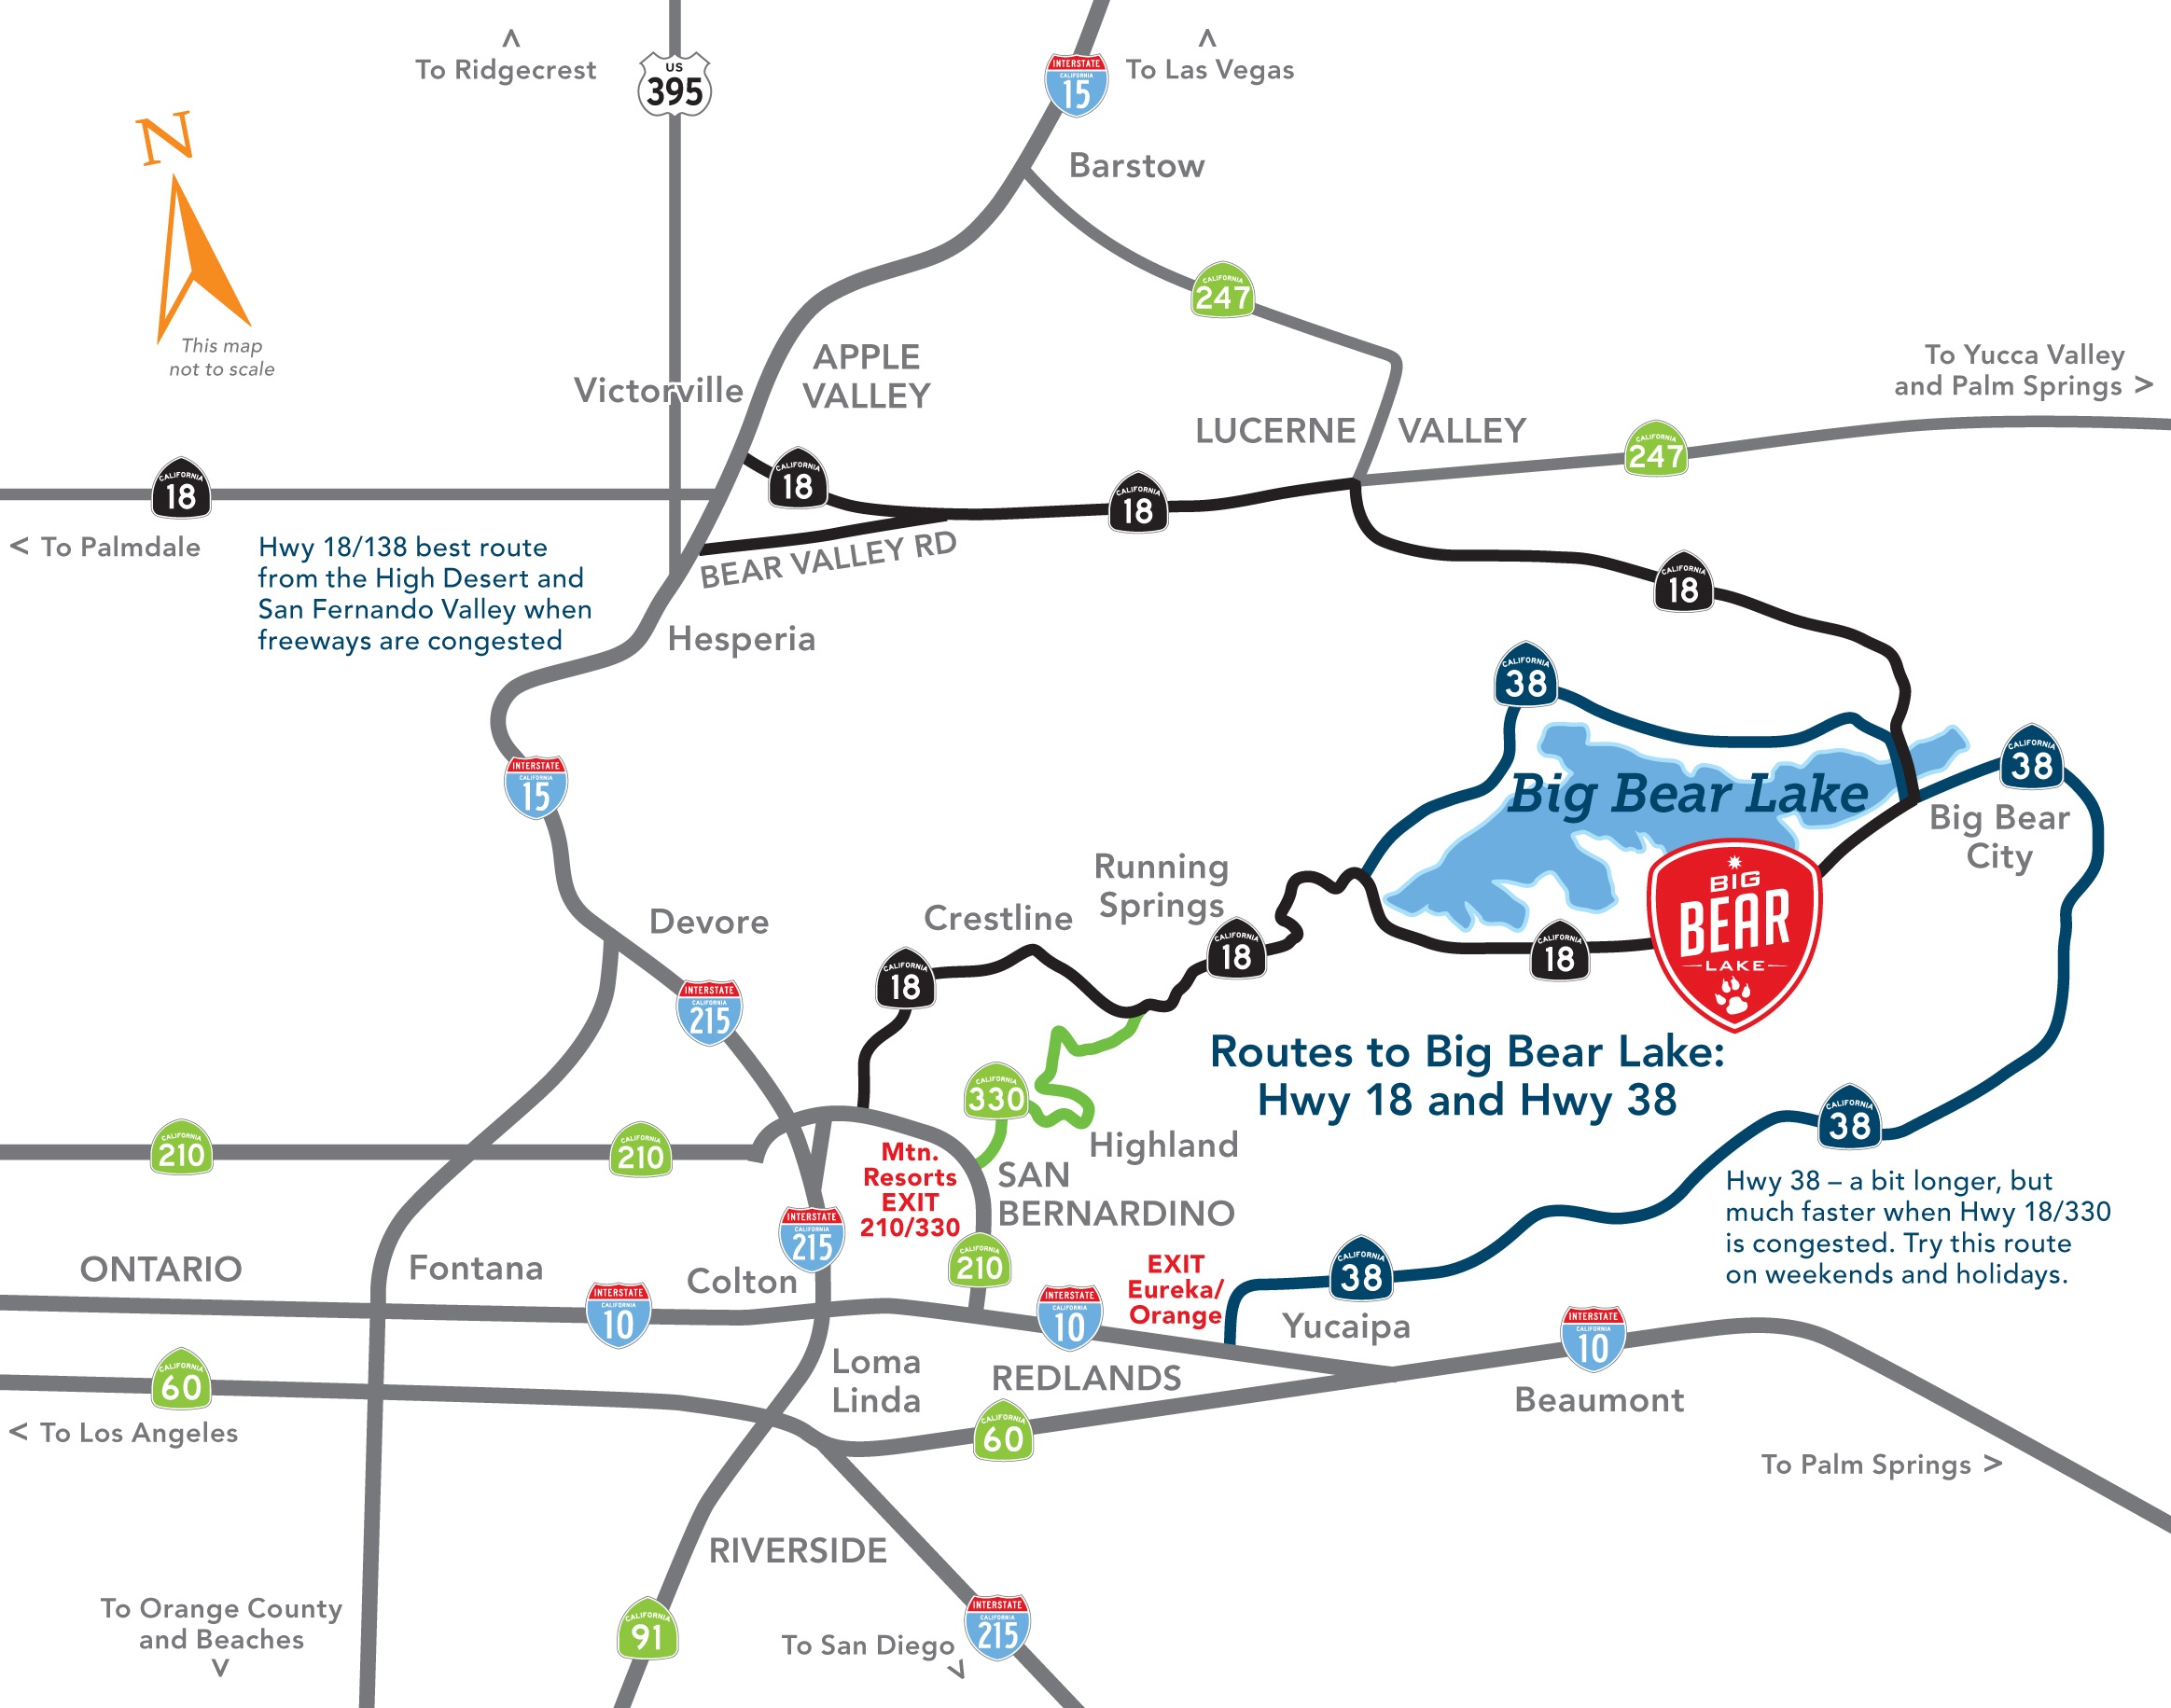 Driving Directions Into Big Bear Lake (4 Unique Routes) - Free Printable Driving Directions